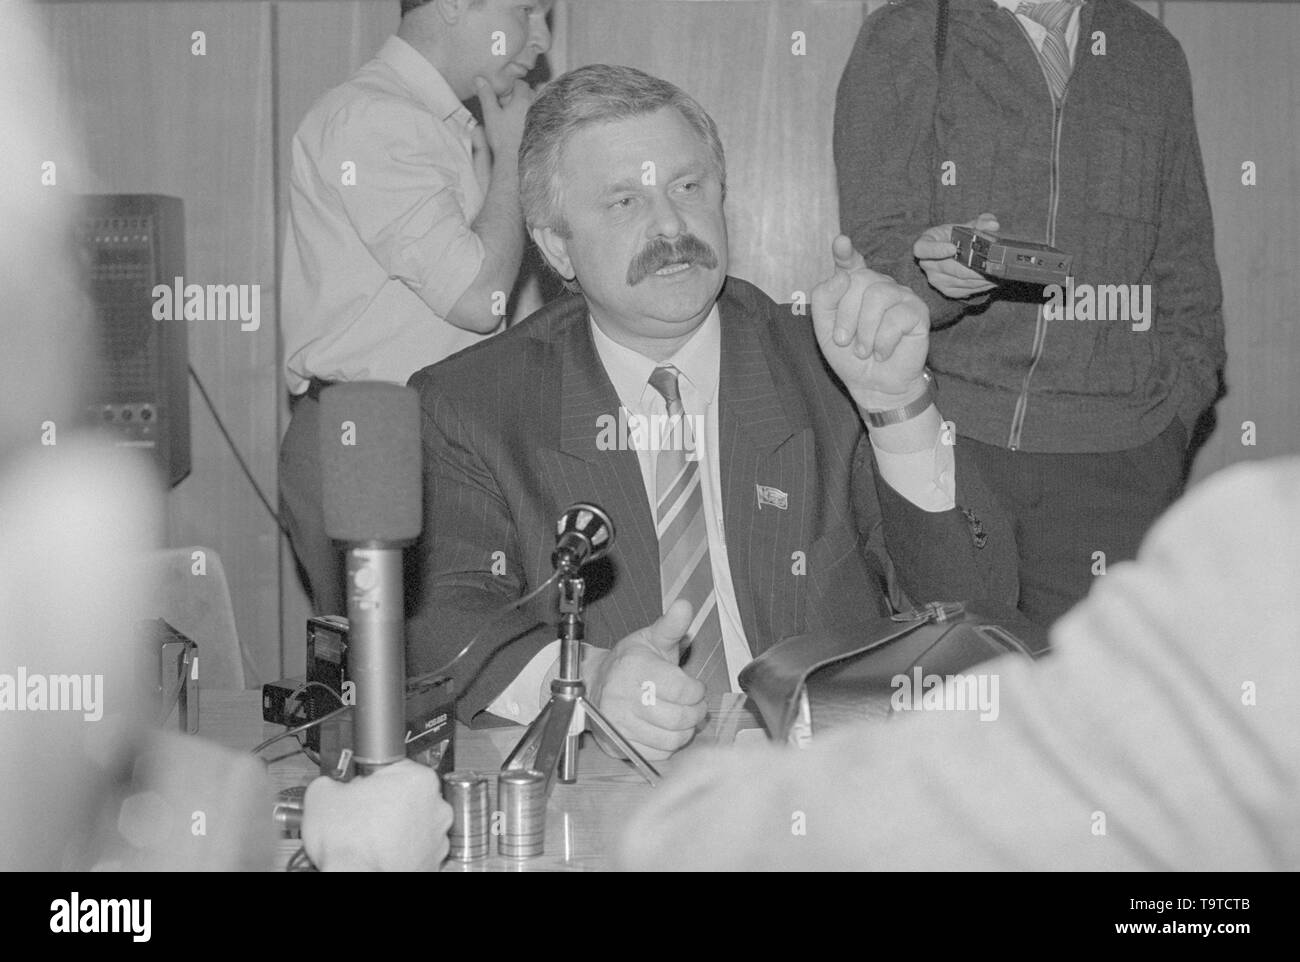 Moscow, Russia - March 28, 1991: People's deputy of the Russian SFSR Alexander Vladimirovich Rutskoy gives press conference at 3d extraordinary Congress of people's deputies of russian RSFSR. Stock Photo